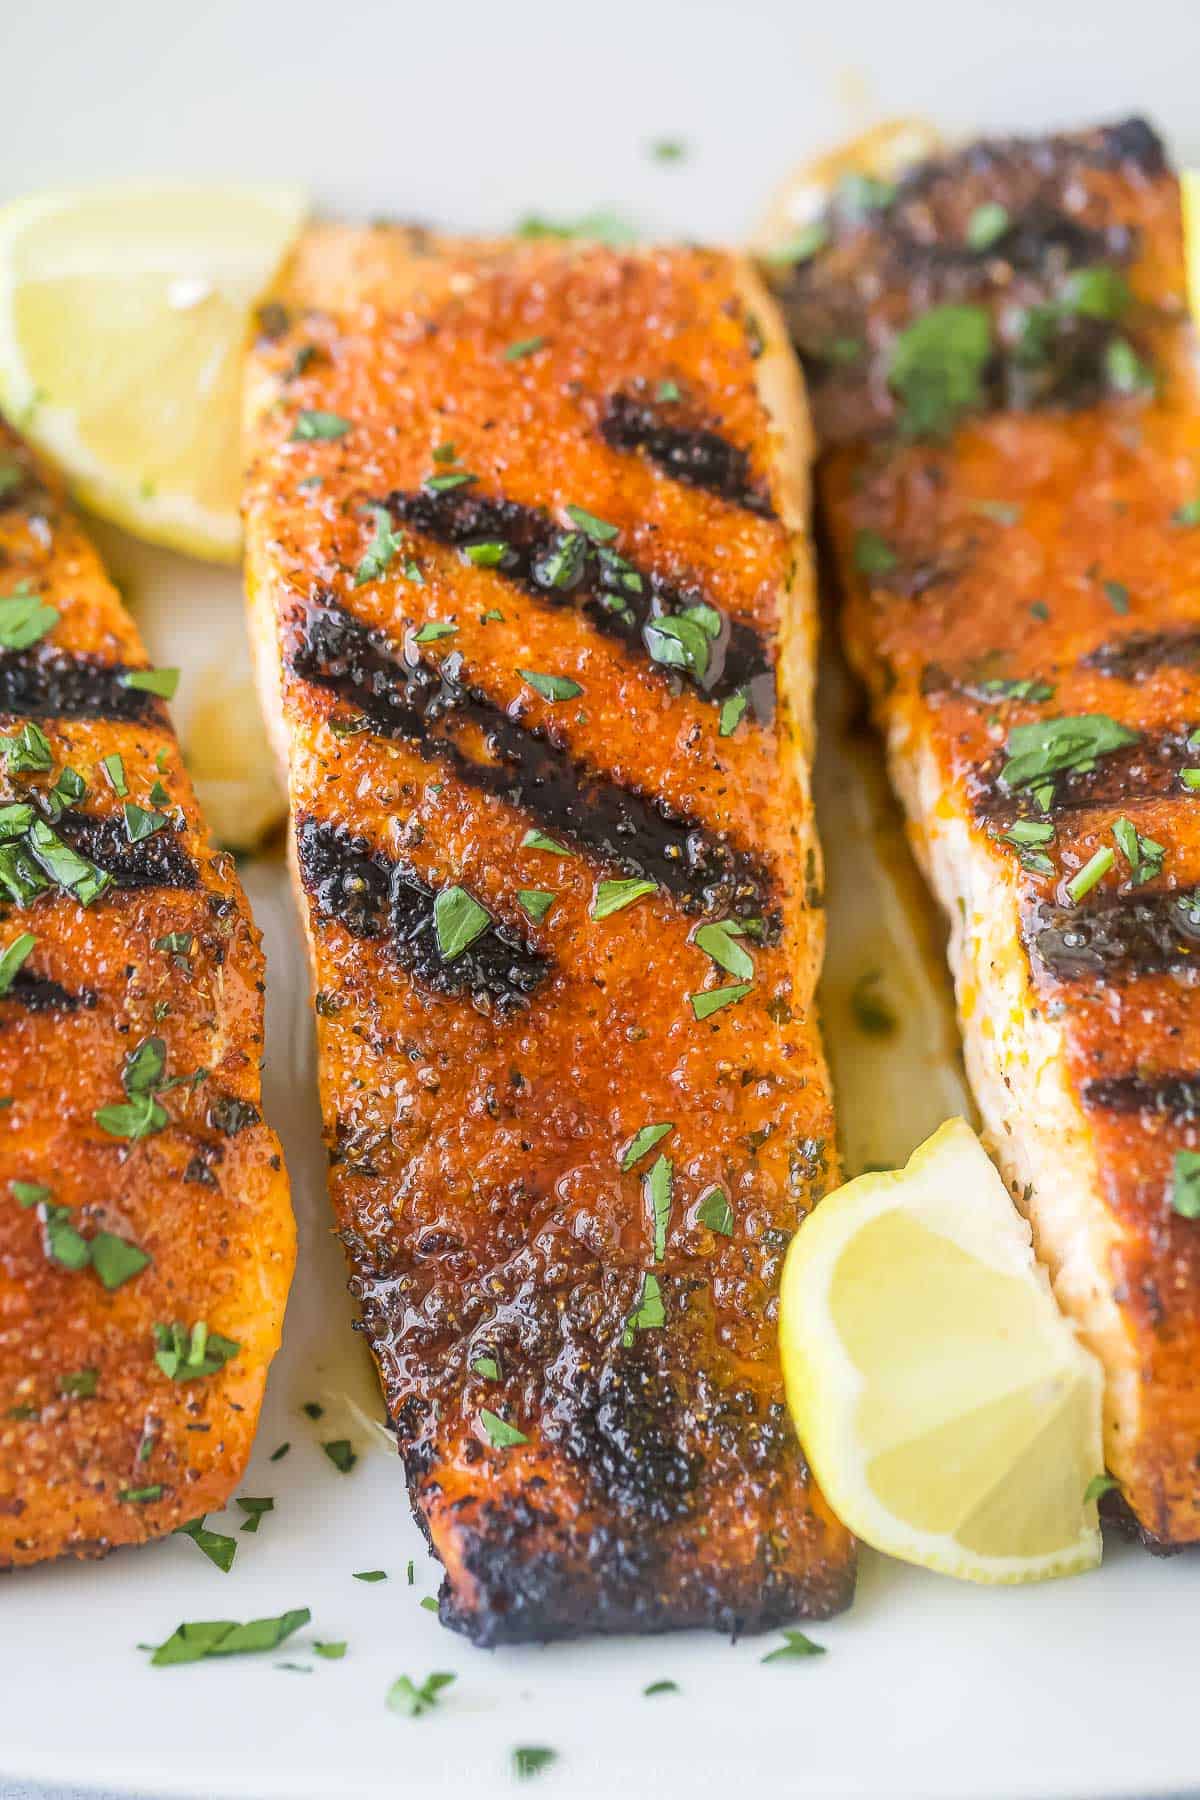 A close-up shot of three blackened salmon fillets on a plate with fresh lemon wedges.